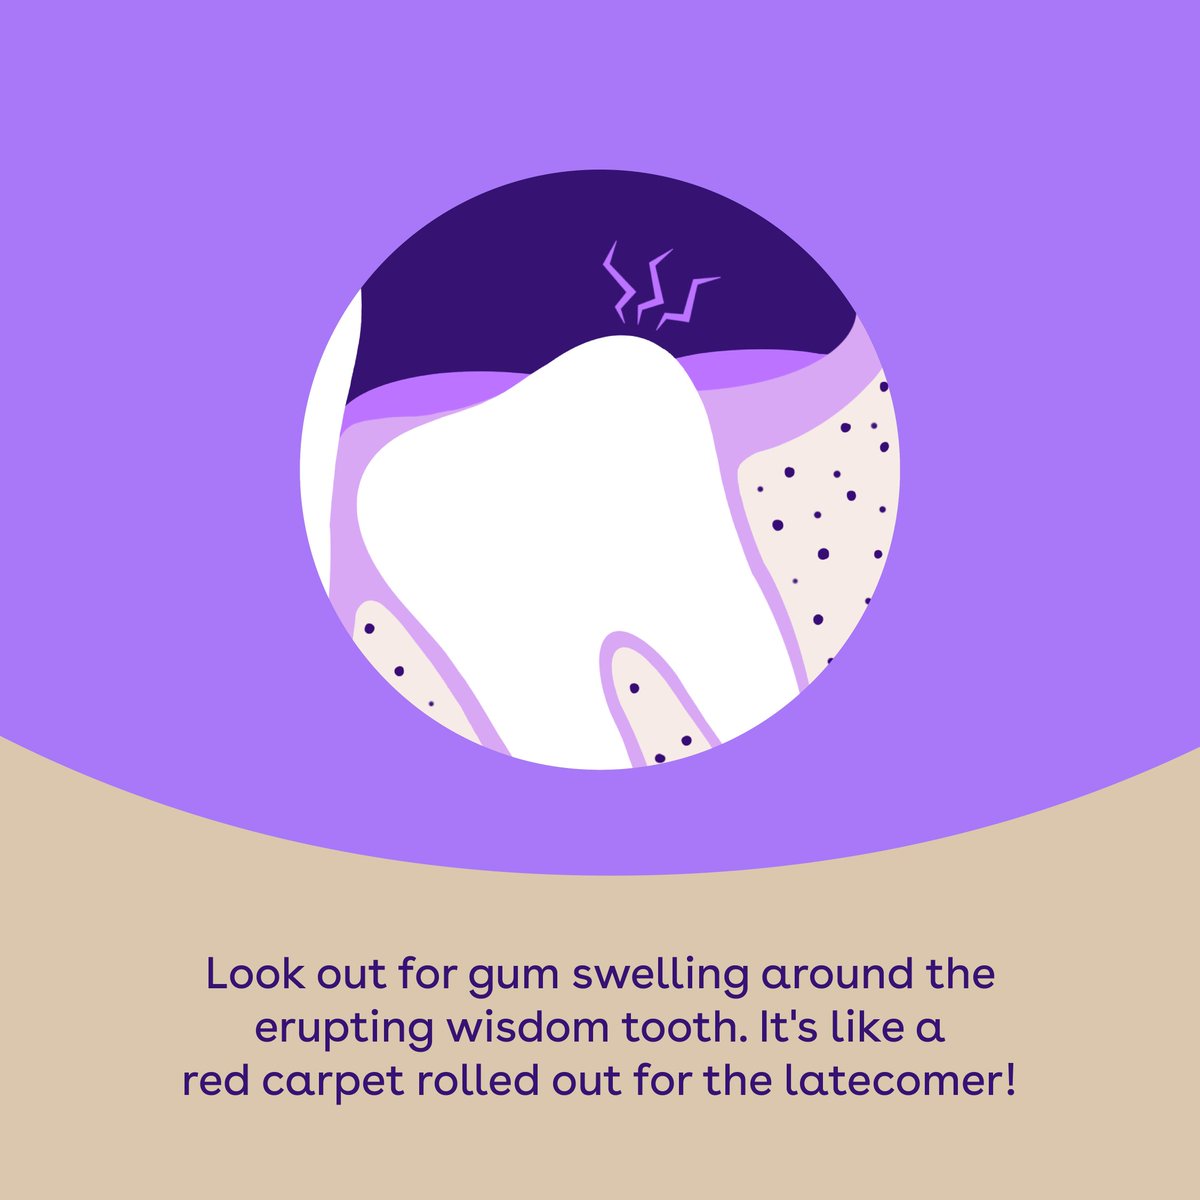 Don't ignore these signs that are indicative of a wisdom tooth eruption. Awareness is the first step towards good oral health.

#Dezy #DentalMadeEasy #oralhealth #dentalcare #dentalclinics #dental #HealthForAll #WisdomTooth